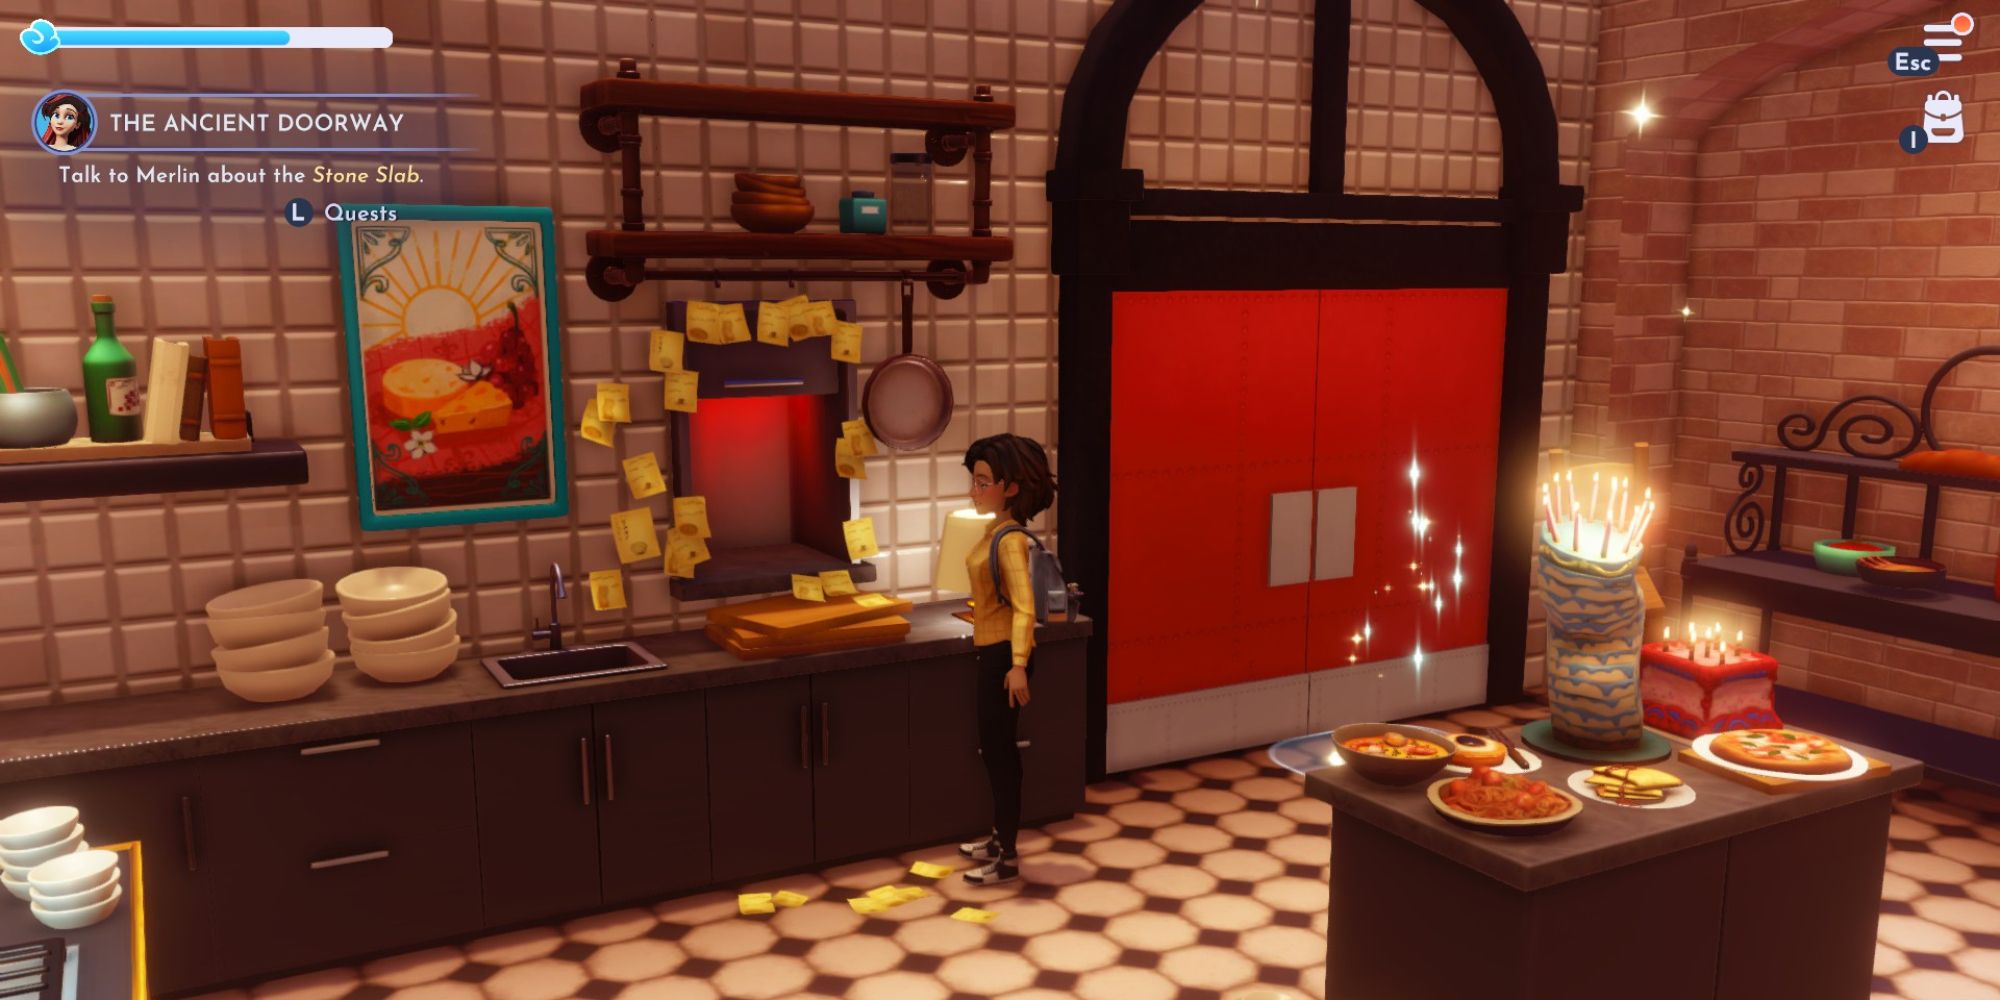 disney dreamlight valley player next to serving hatch in ratatouille realm